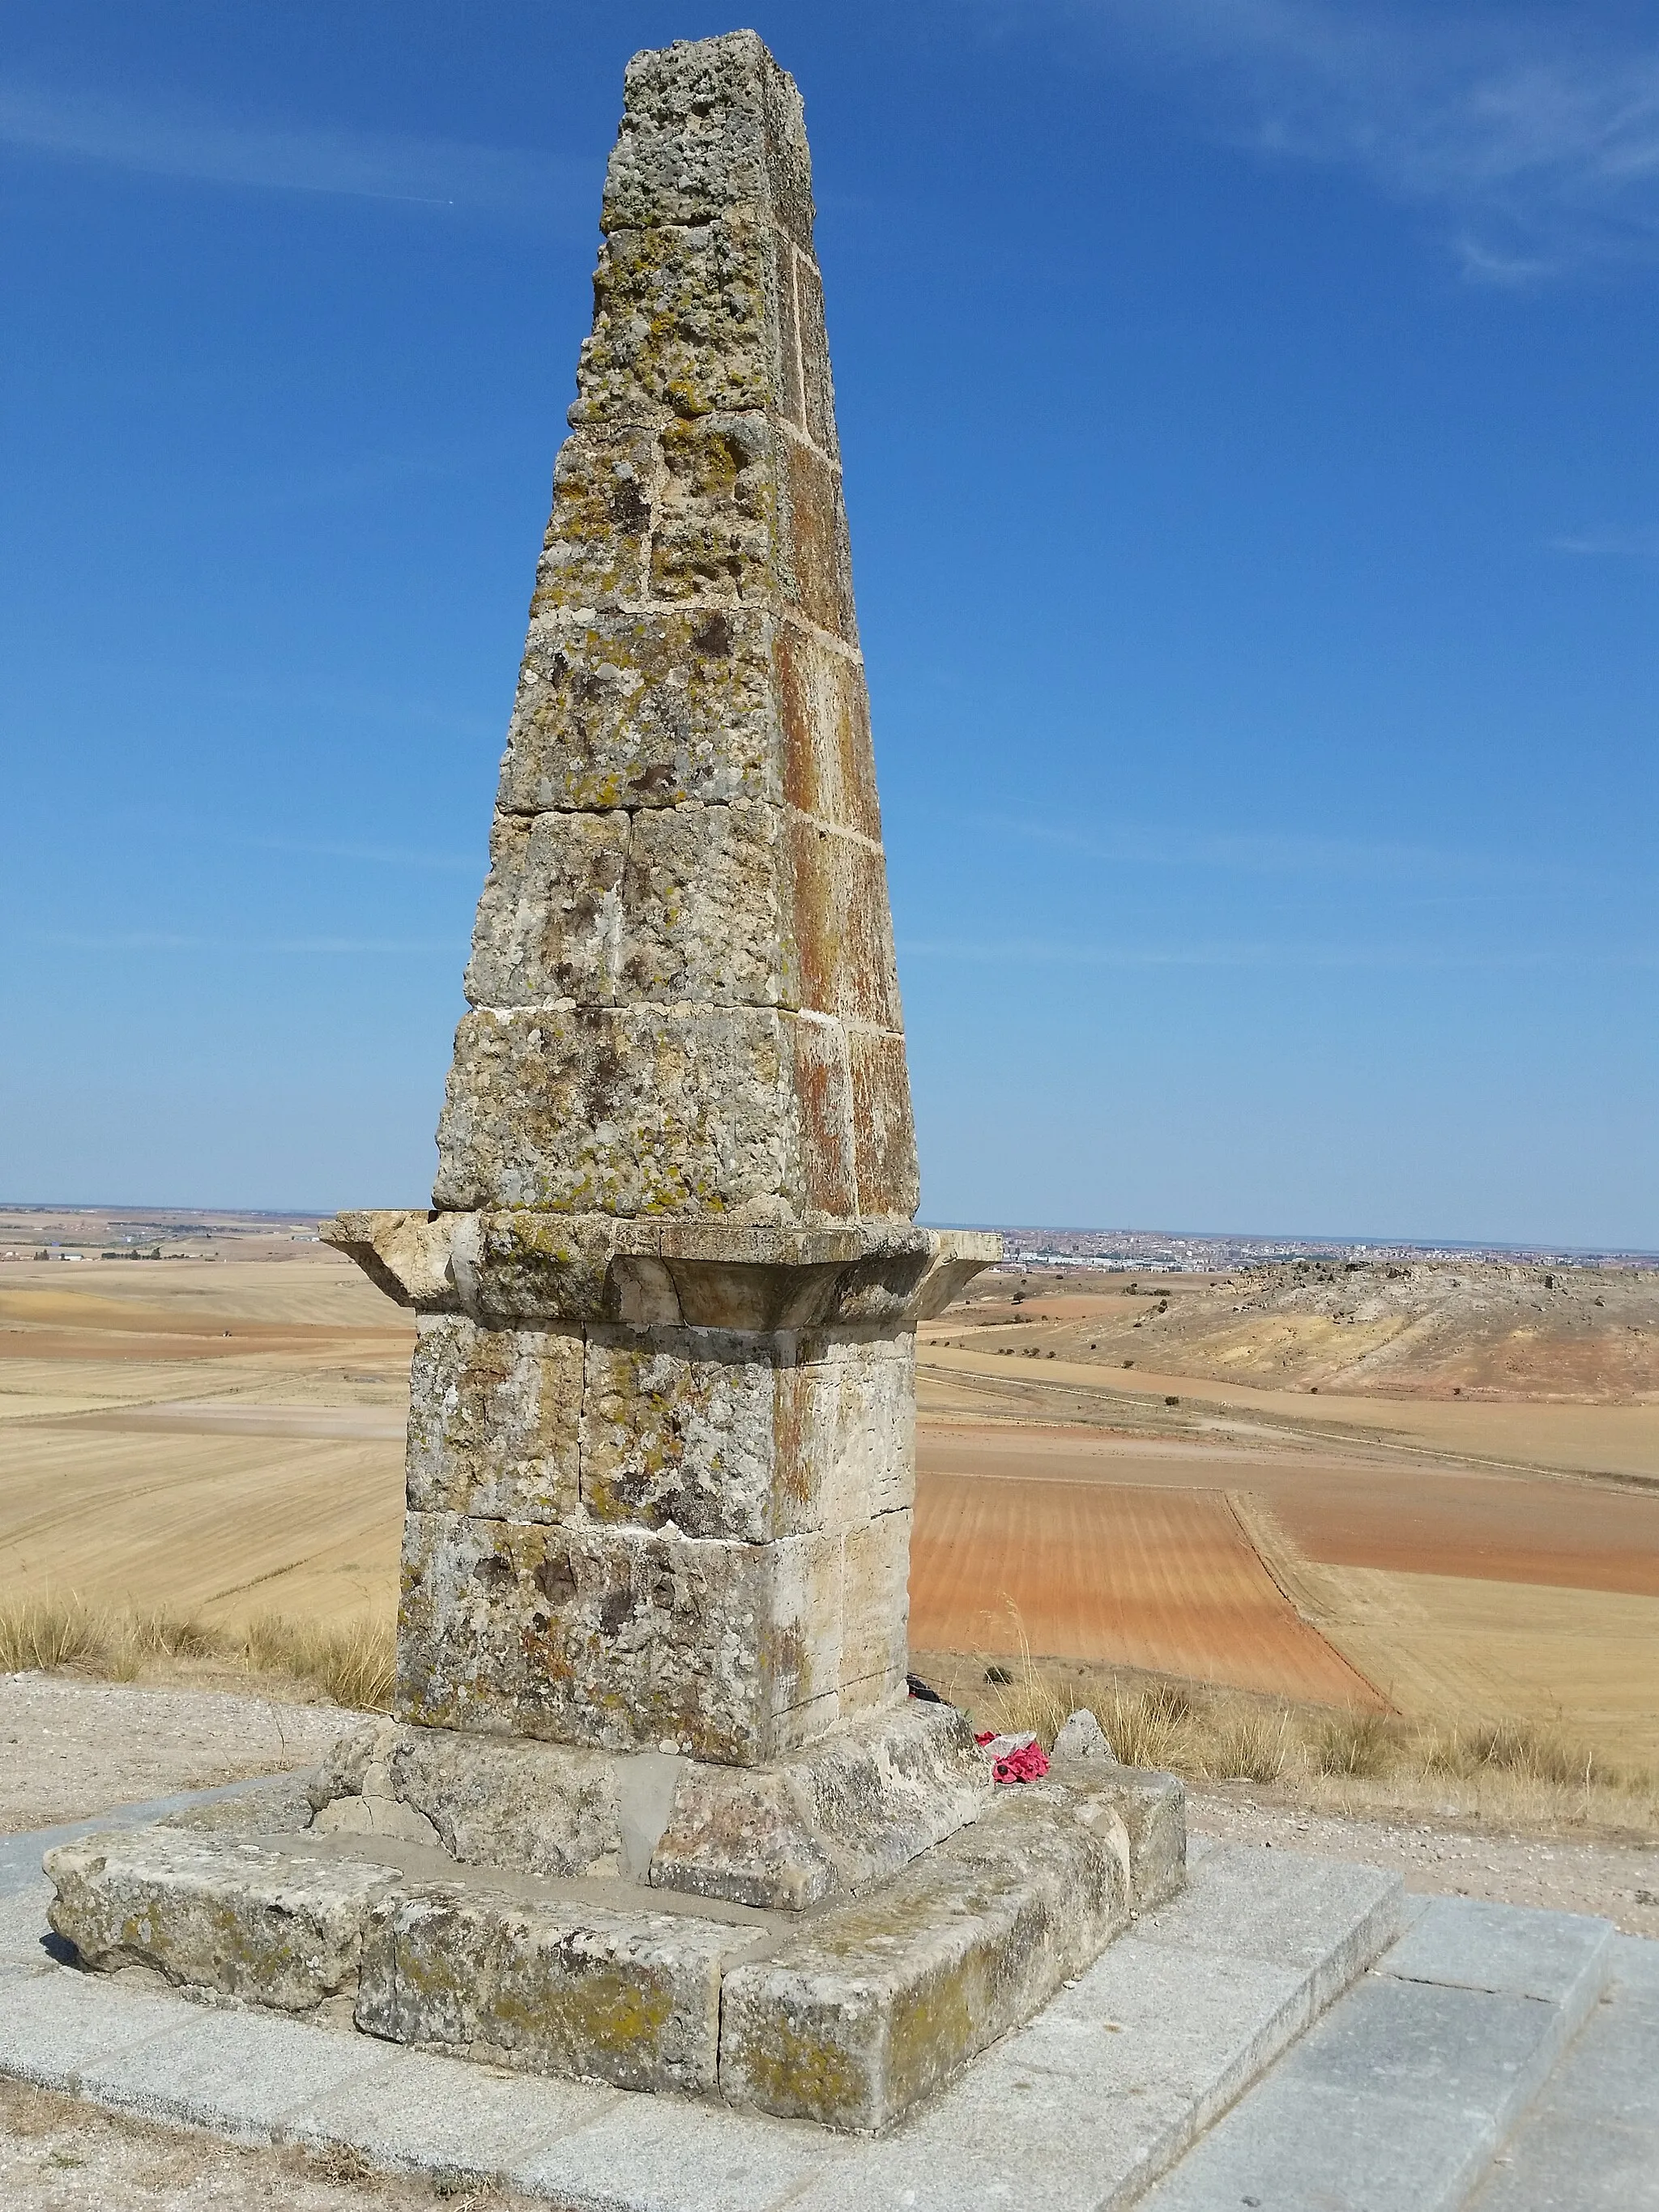 Photo showing: Arapile Battle Memorial 1812
The monument on top of this hill is for the Battle of Arapiles. The Duke of Wellington defeated from this hill Marshal Auguste Marmont's French forces on 22 July 1812 who was on the other hill